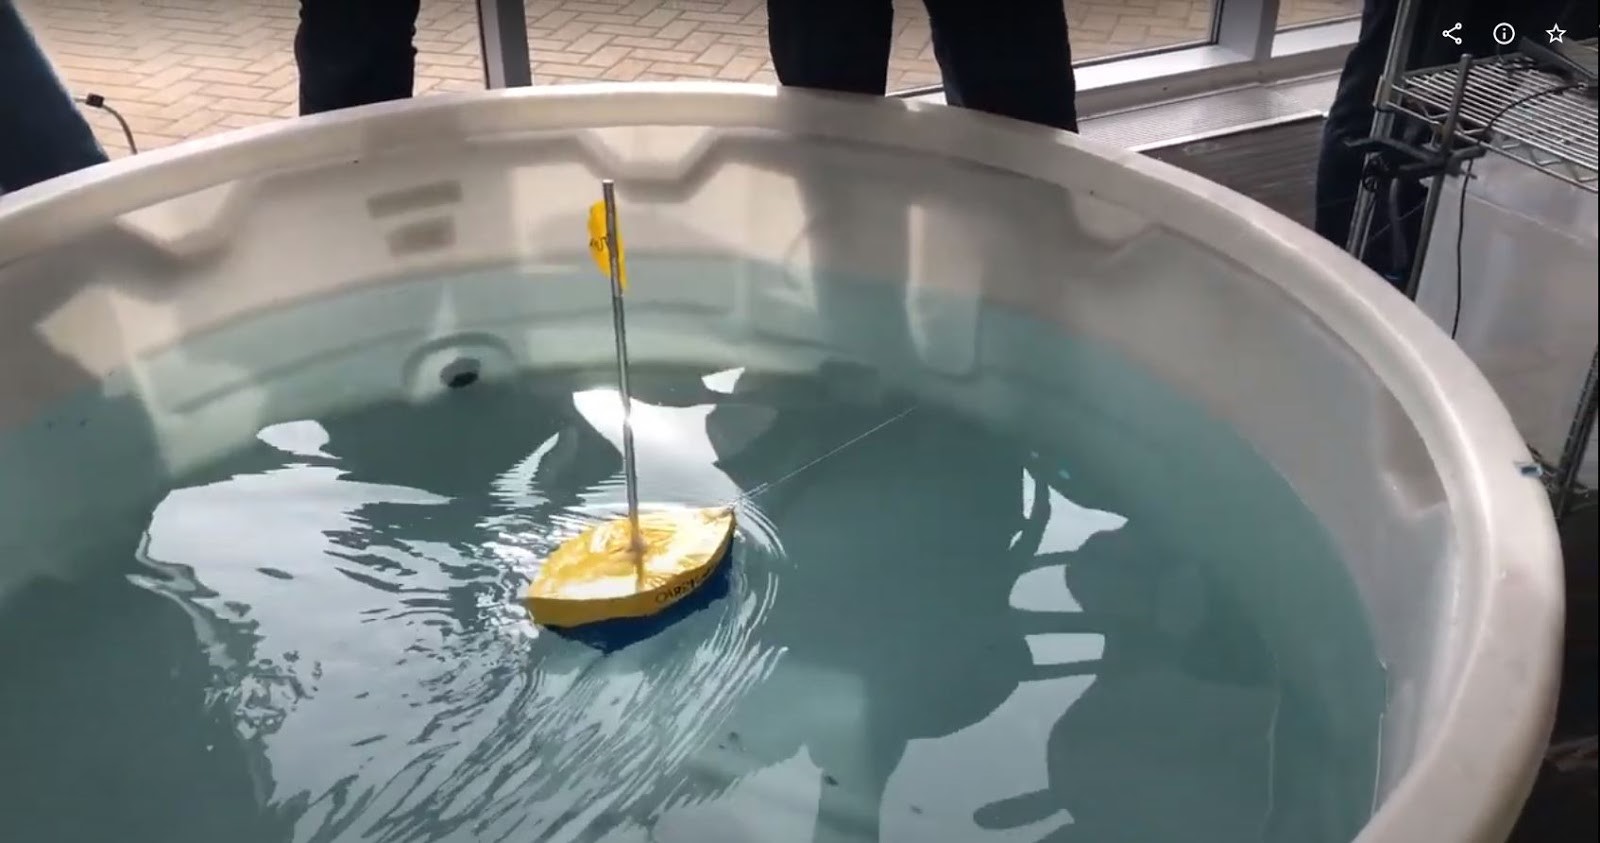 A small boat floating in a tank of water.